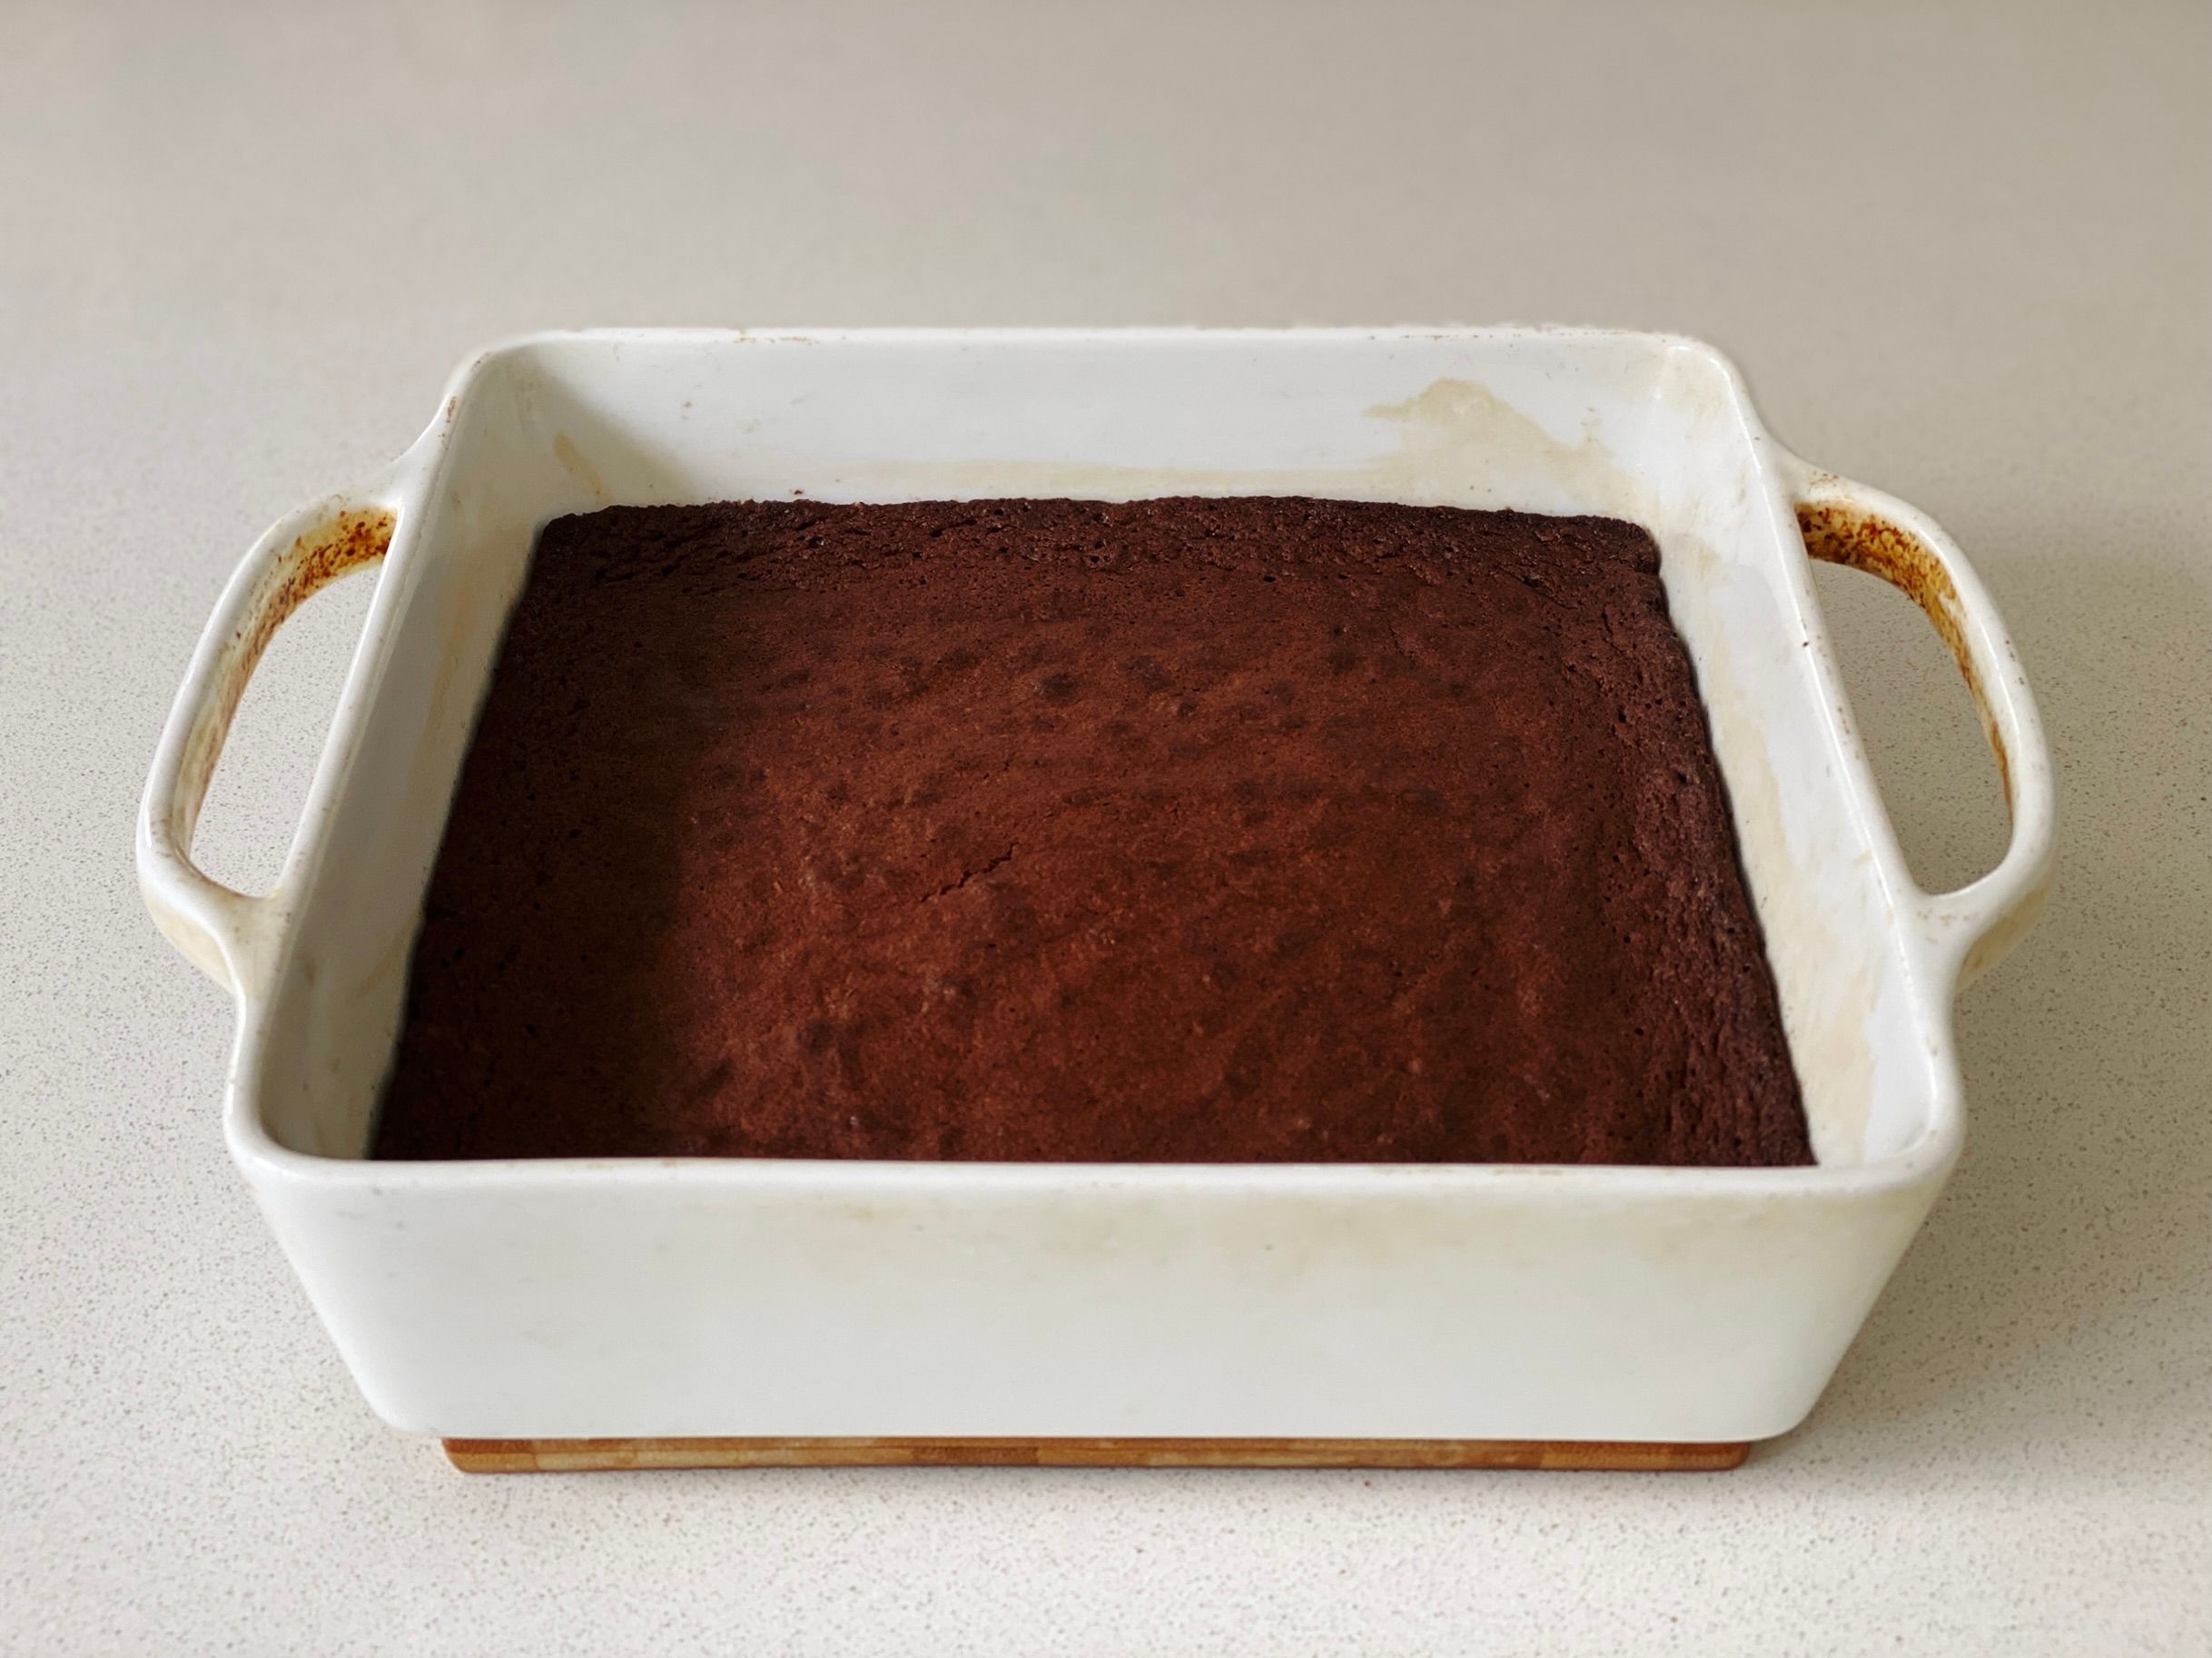 A photo of a square white ceramic baking dish with delicious-looking chocolate brownie in it.